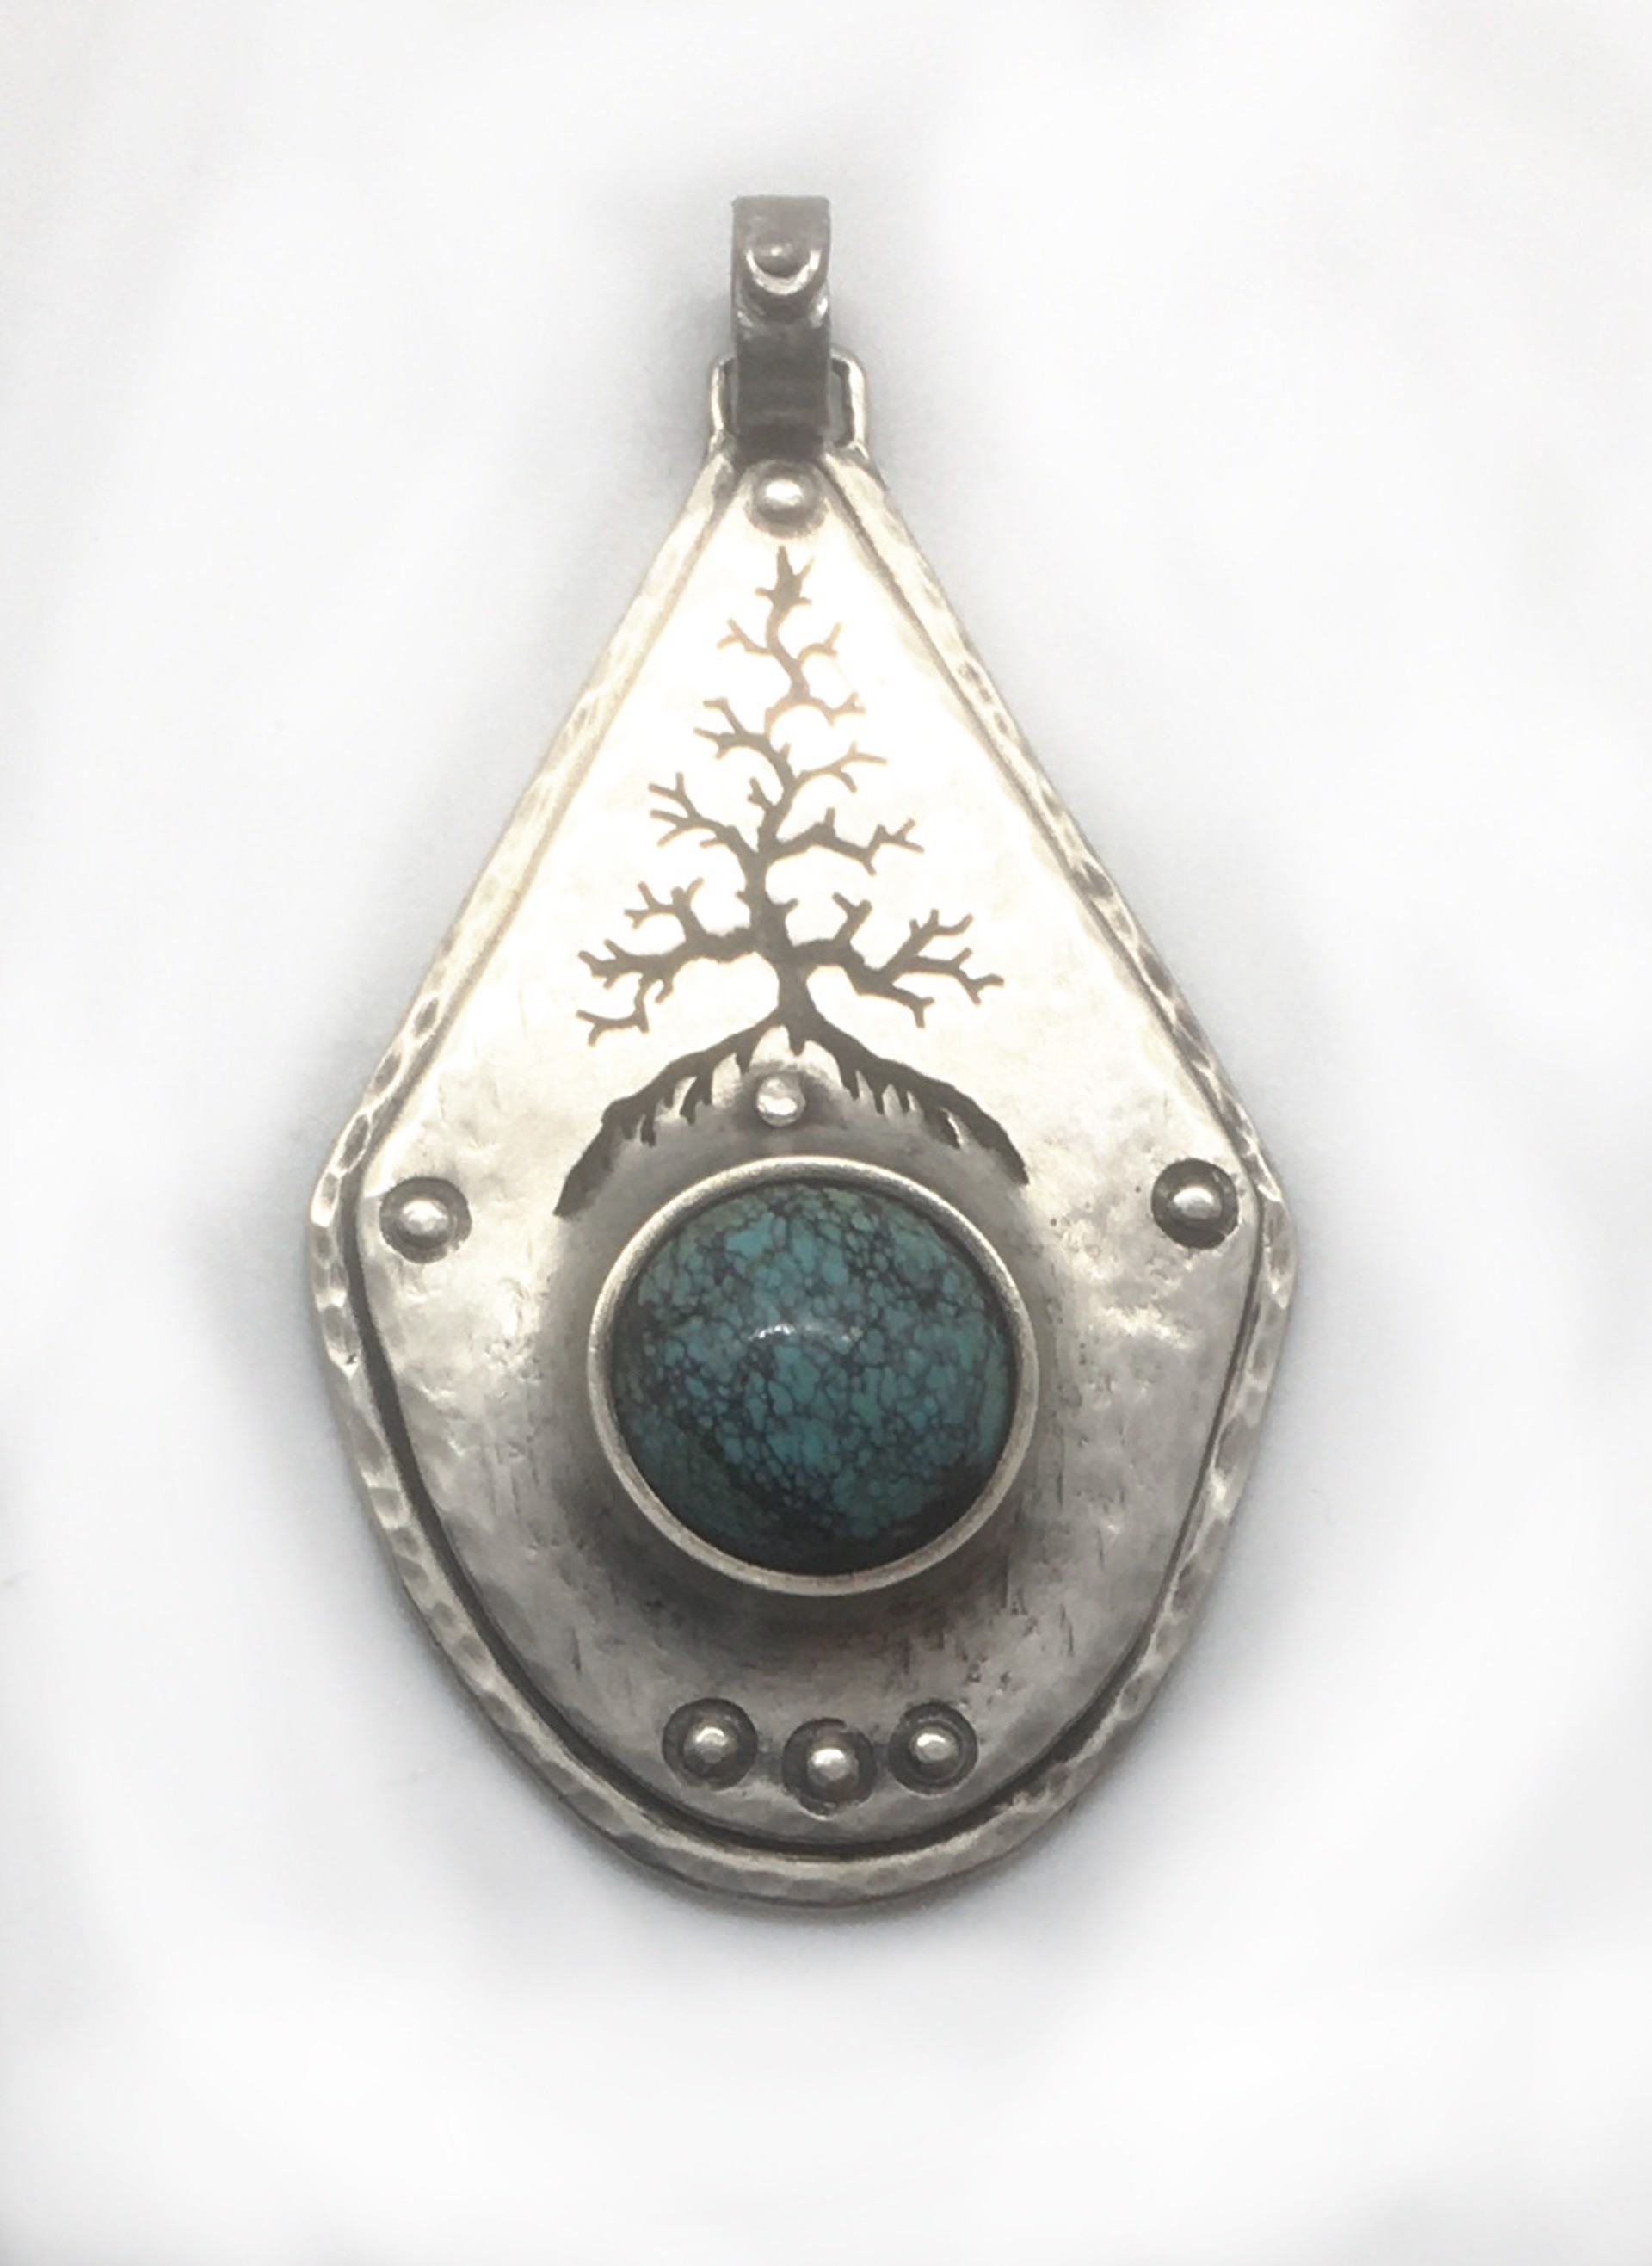 Handmade Silver and Turquoise Riveted Tree Pendant  by Grace Ashford